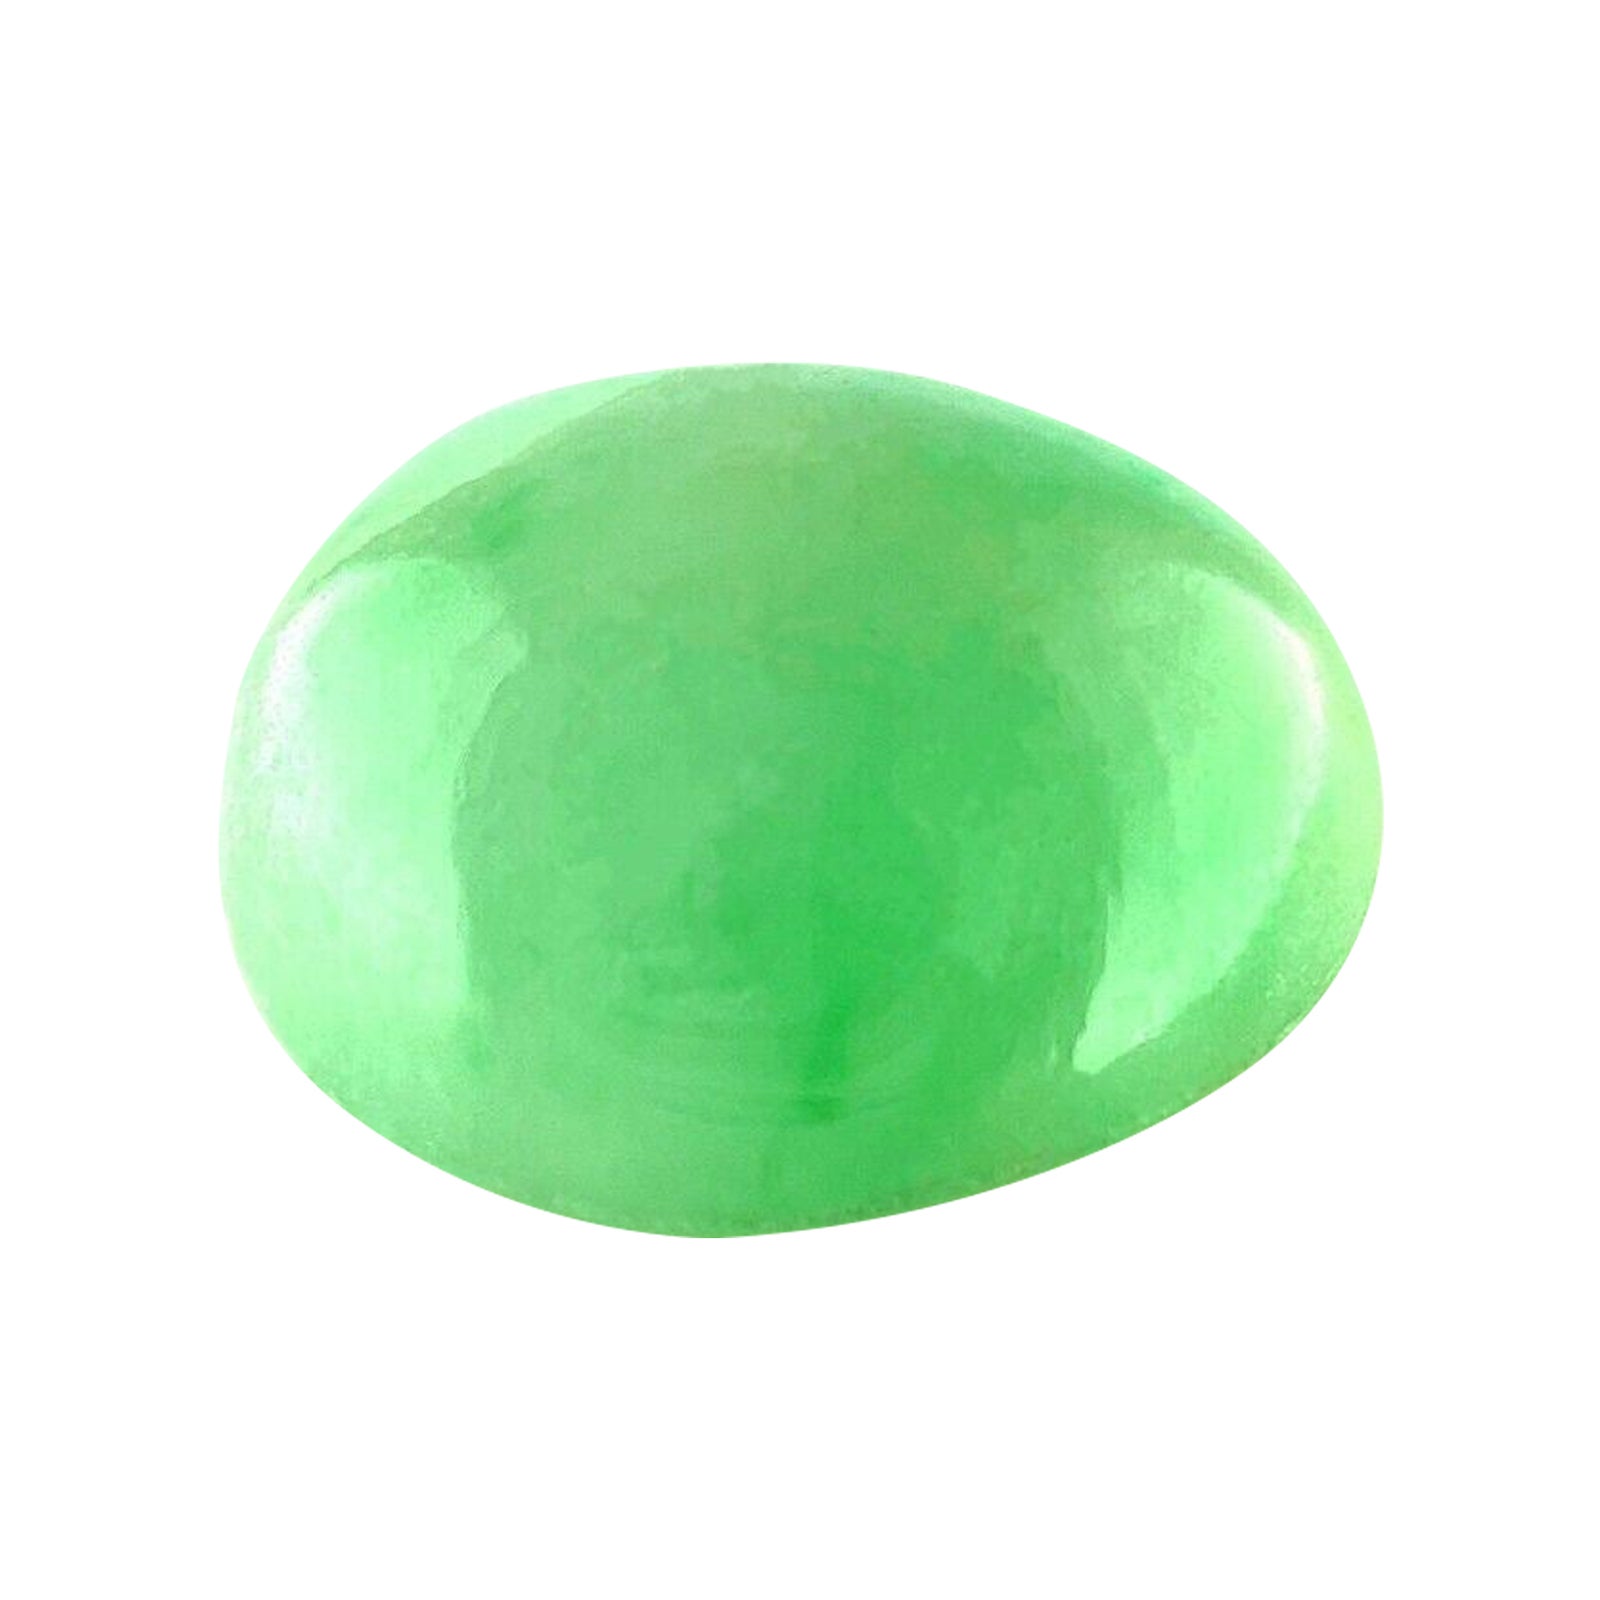 4.58 Carat GIA Certified Green Jadeite Jade ‘A’ Grade Oval Cabochon Untreated For Sale